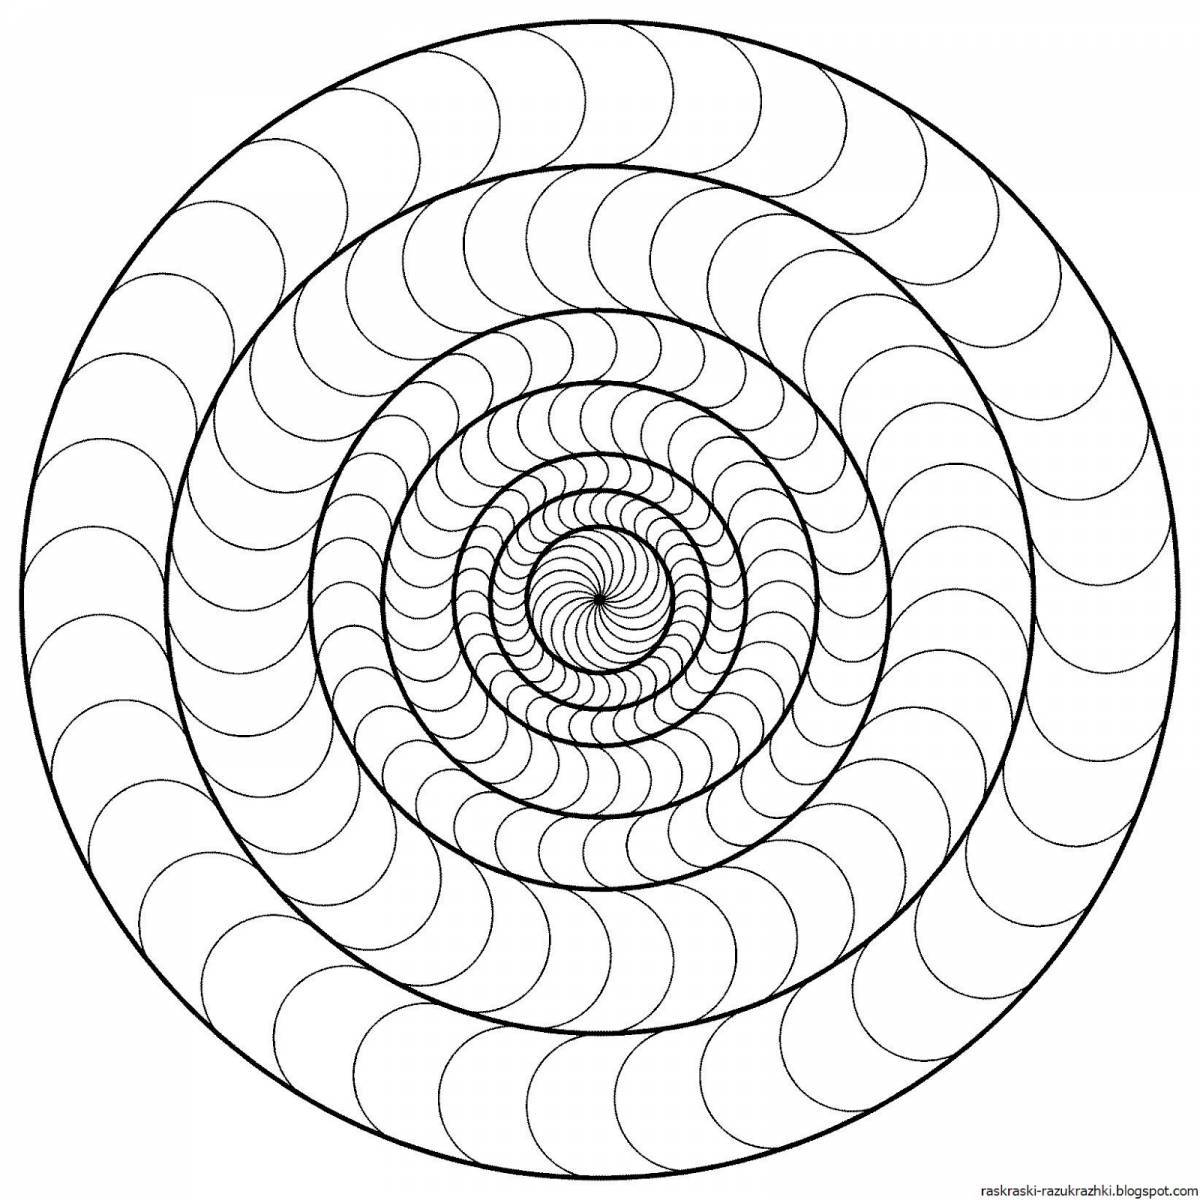 Coloring page with bright spiral pattern